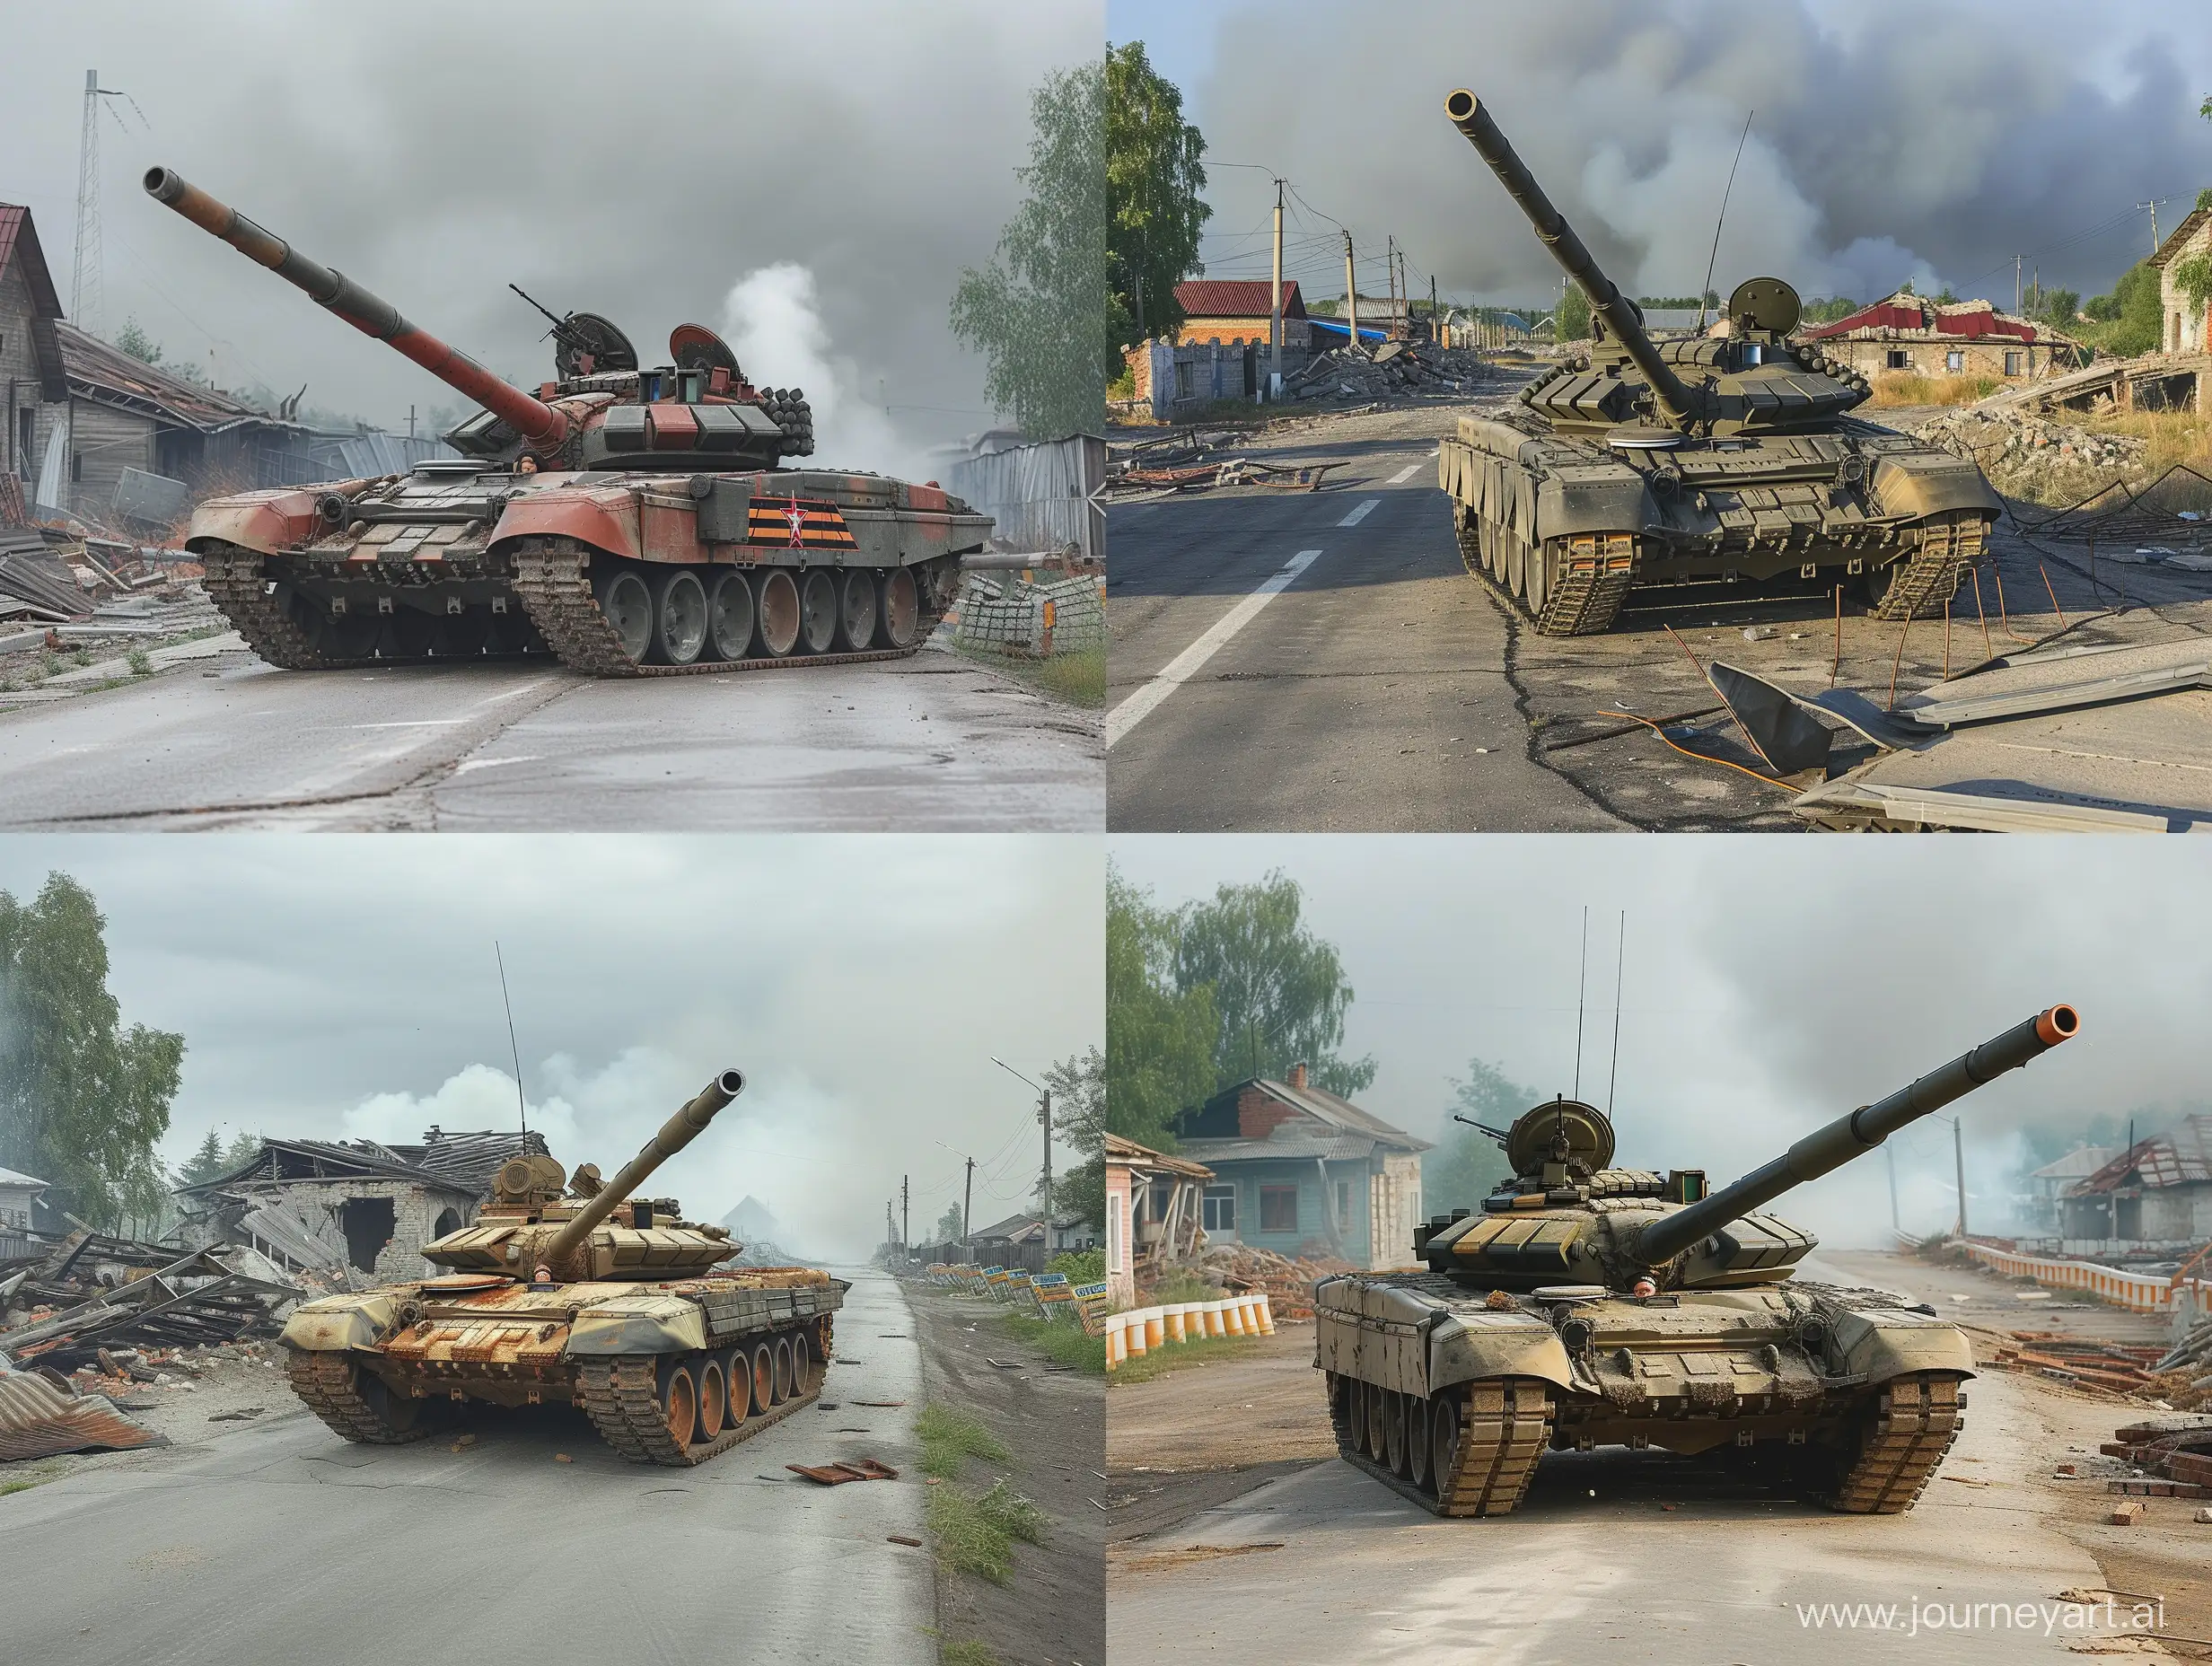 Photorealism, Russia, Modernity, Summer, Village, Ruins, Destroyed Houses, Wreckage, Military Equipment, Modern Russian Tank, T-72, T-80, T-90, Standing on an Asphalt Road, Road Barriers , Roadblock, Smoke in the Background, Camera Angle Close, Side View, Focus, Zoom